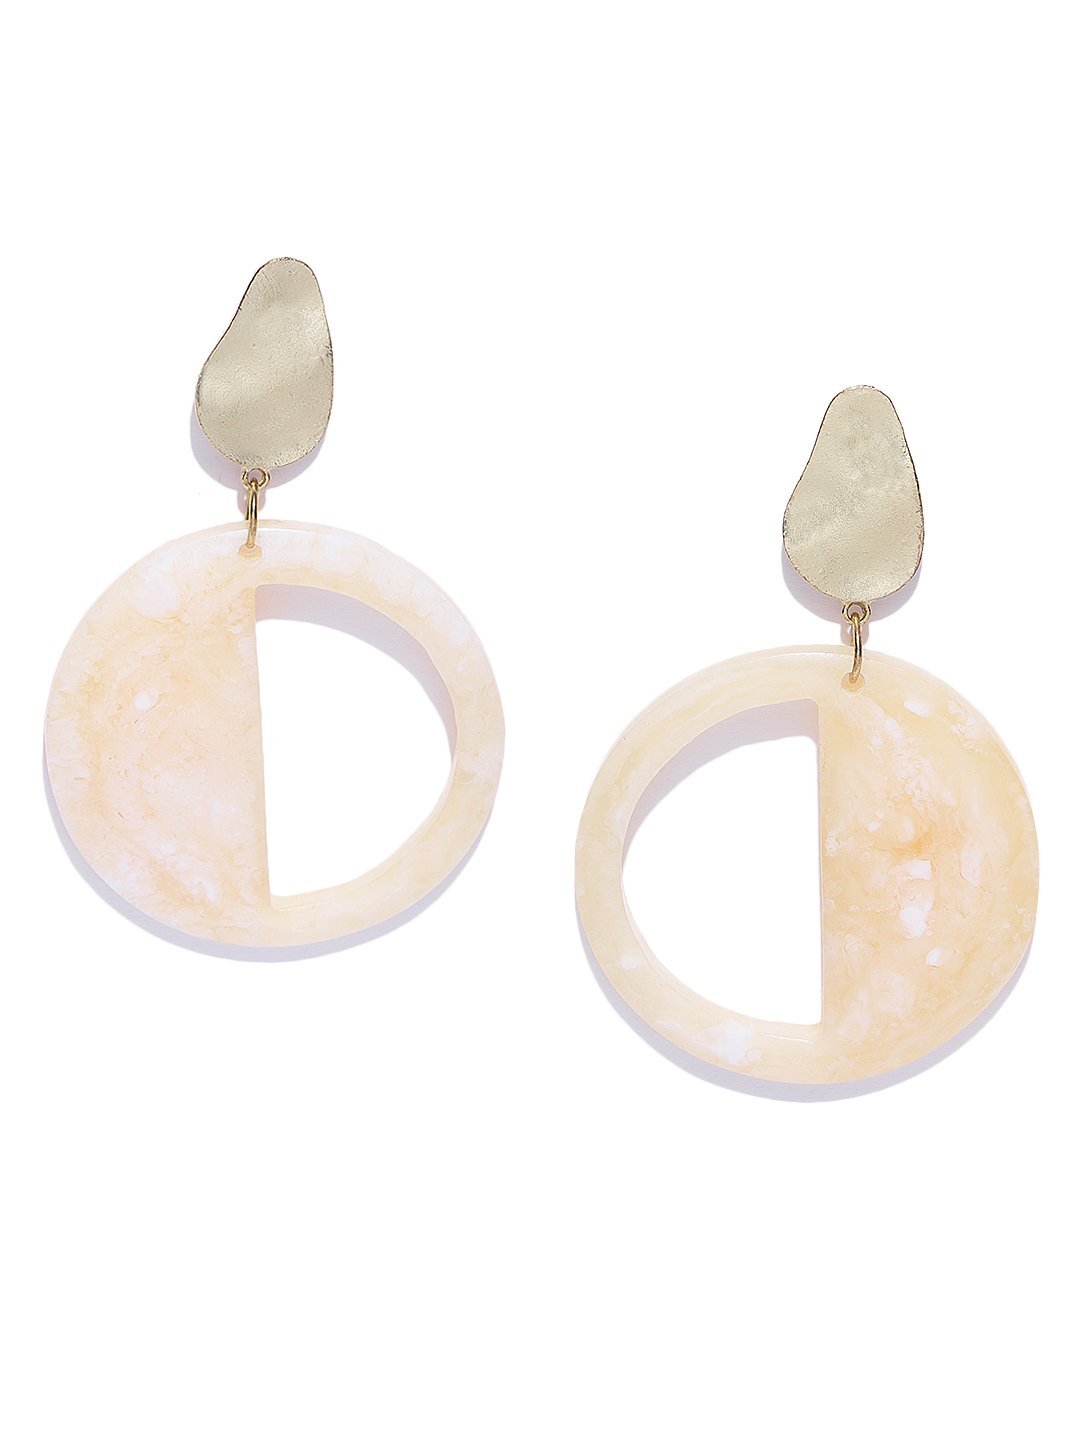 Blueberry off white circular drop earring